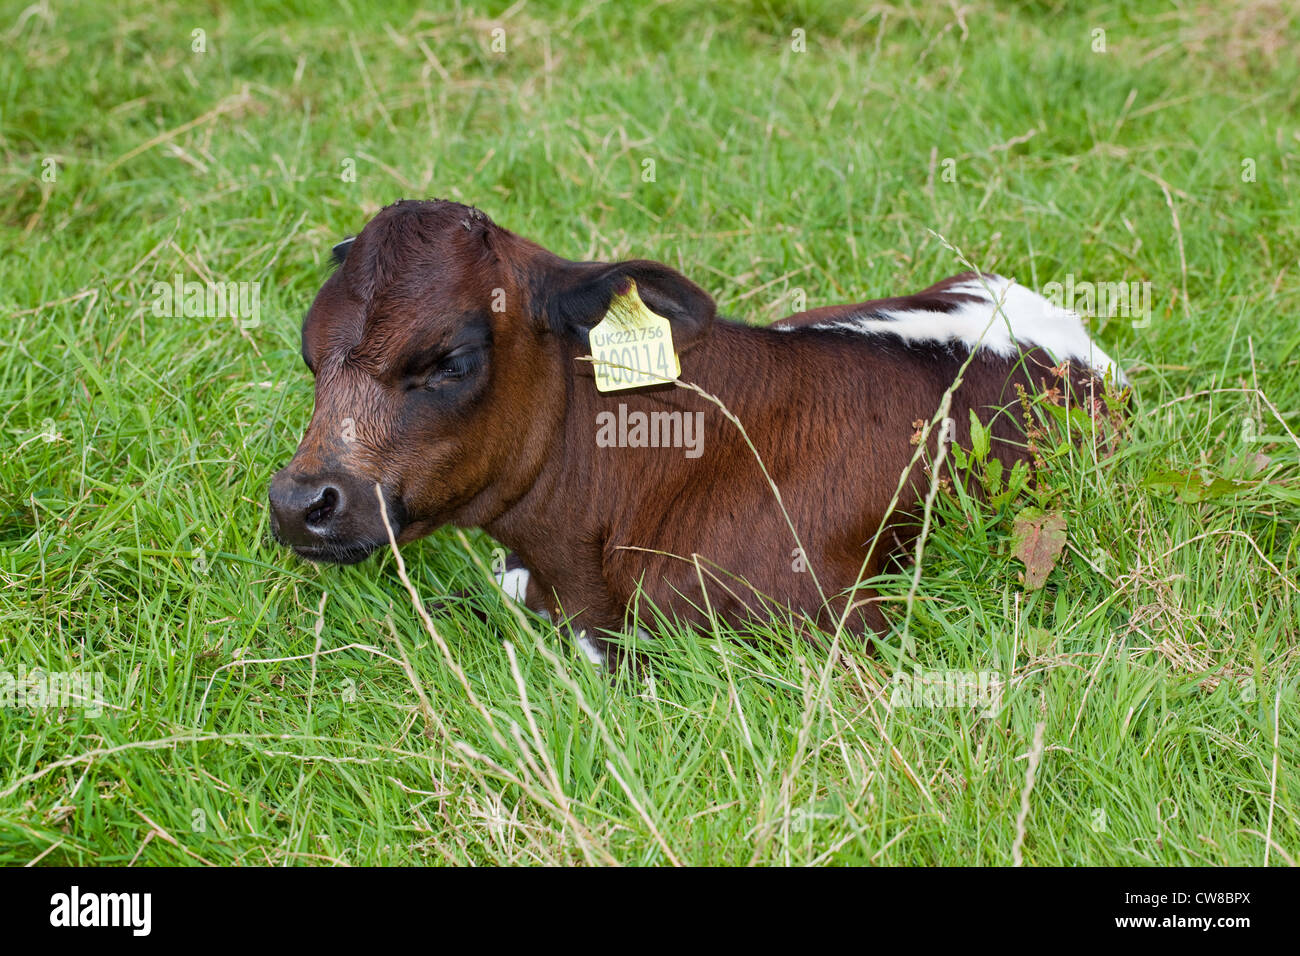 Gloucester Cattle (Bos taurus). Calf. Just born in the field and already identification ear tagged by stockman. Stock Photo